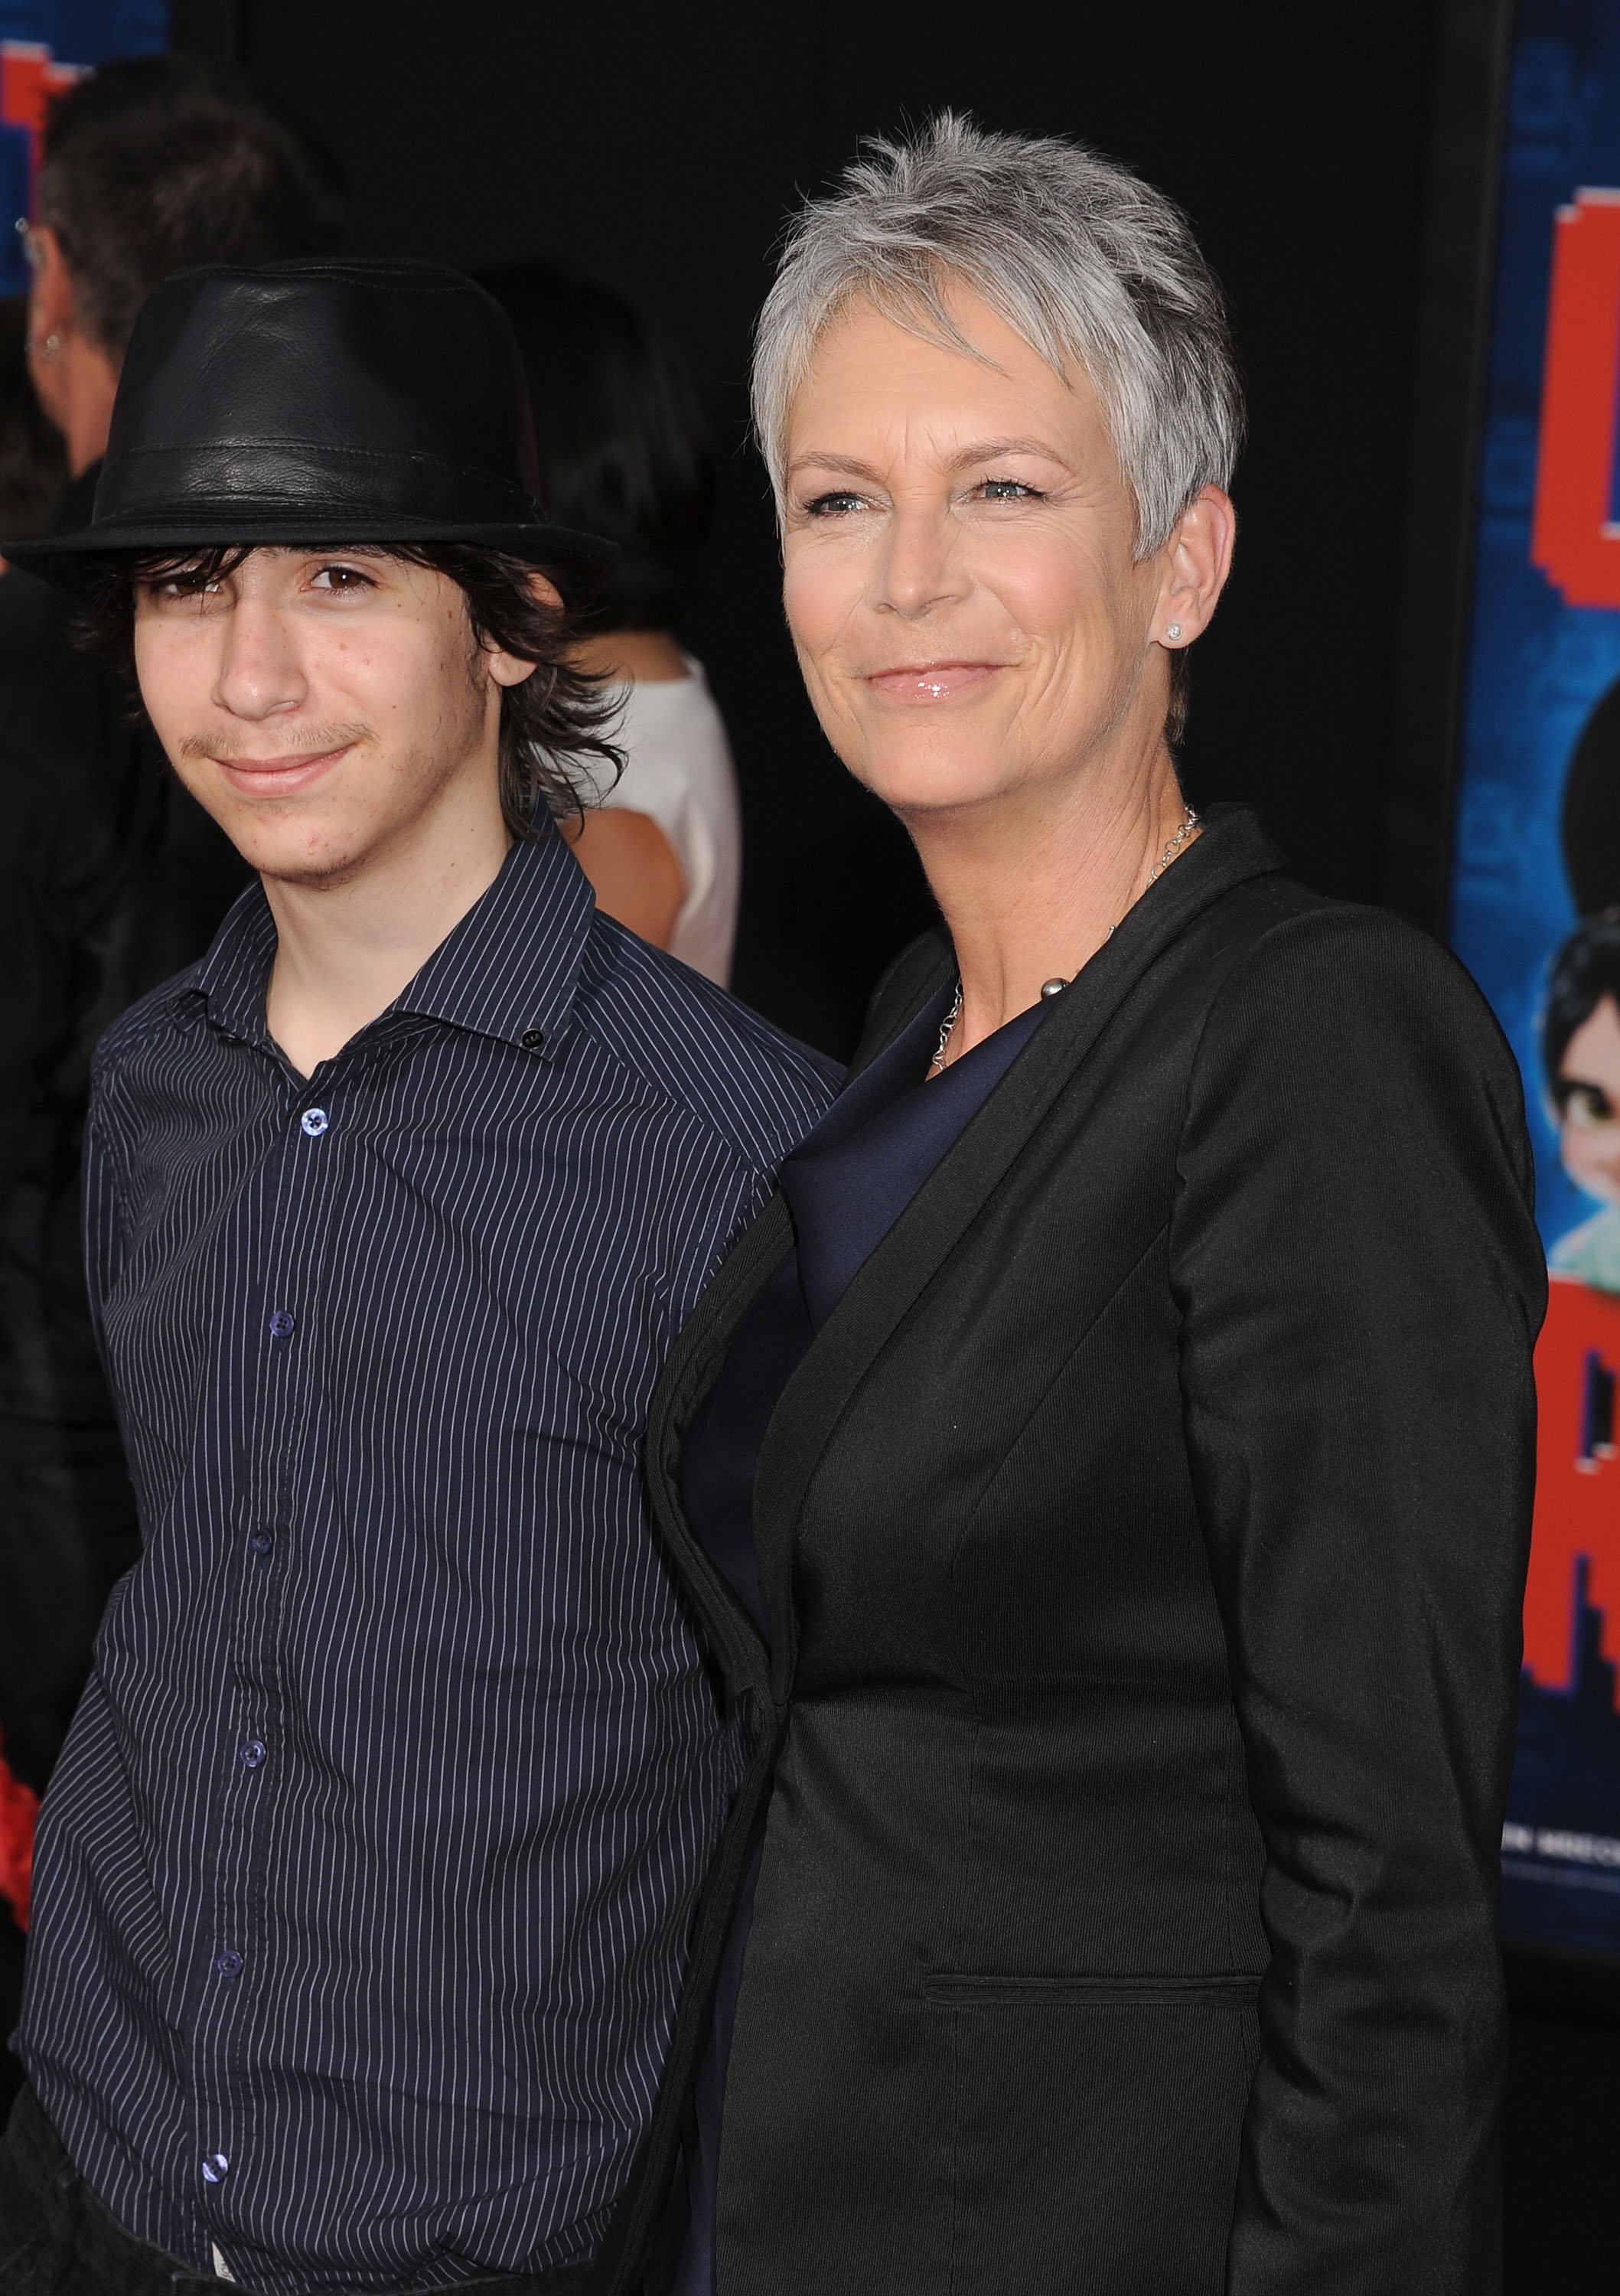 Jamie Lee Curtis and Thomas Guest arrive at the Los Angeles premiere of 'Wreck-It Ralph' at the El Capitan Theatre on October 29, 2012 in Hollywood, California. | Source: Getty Images